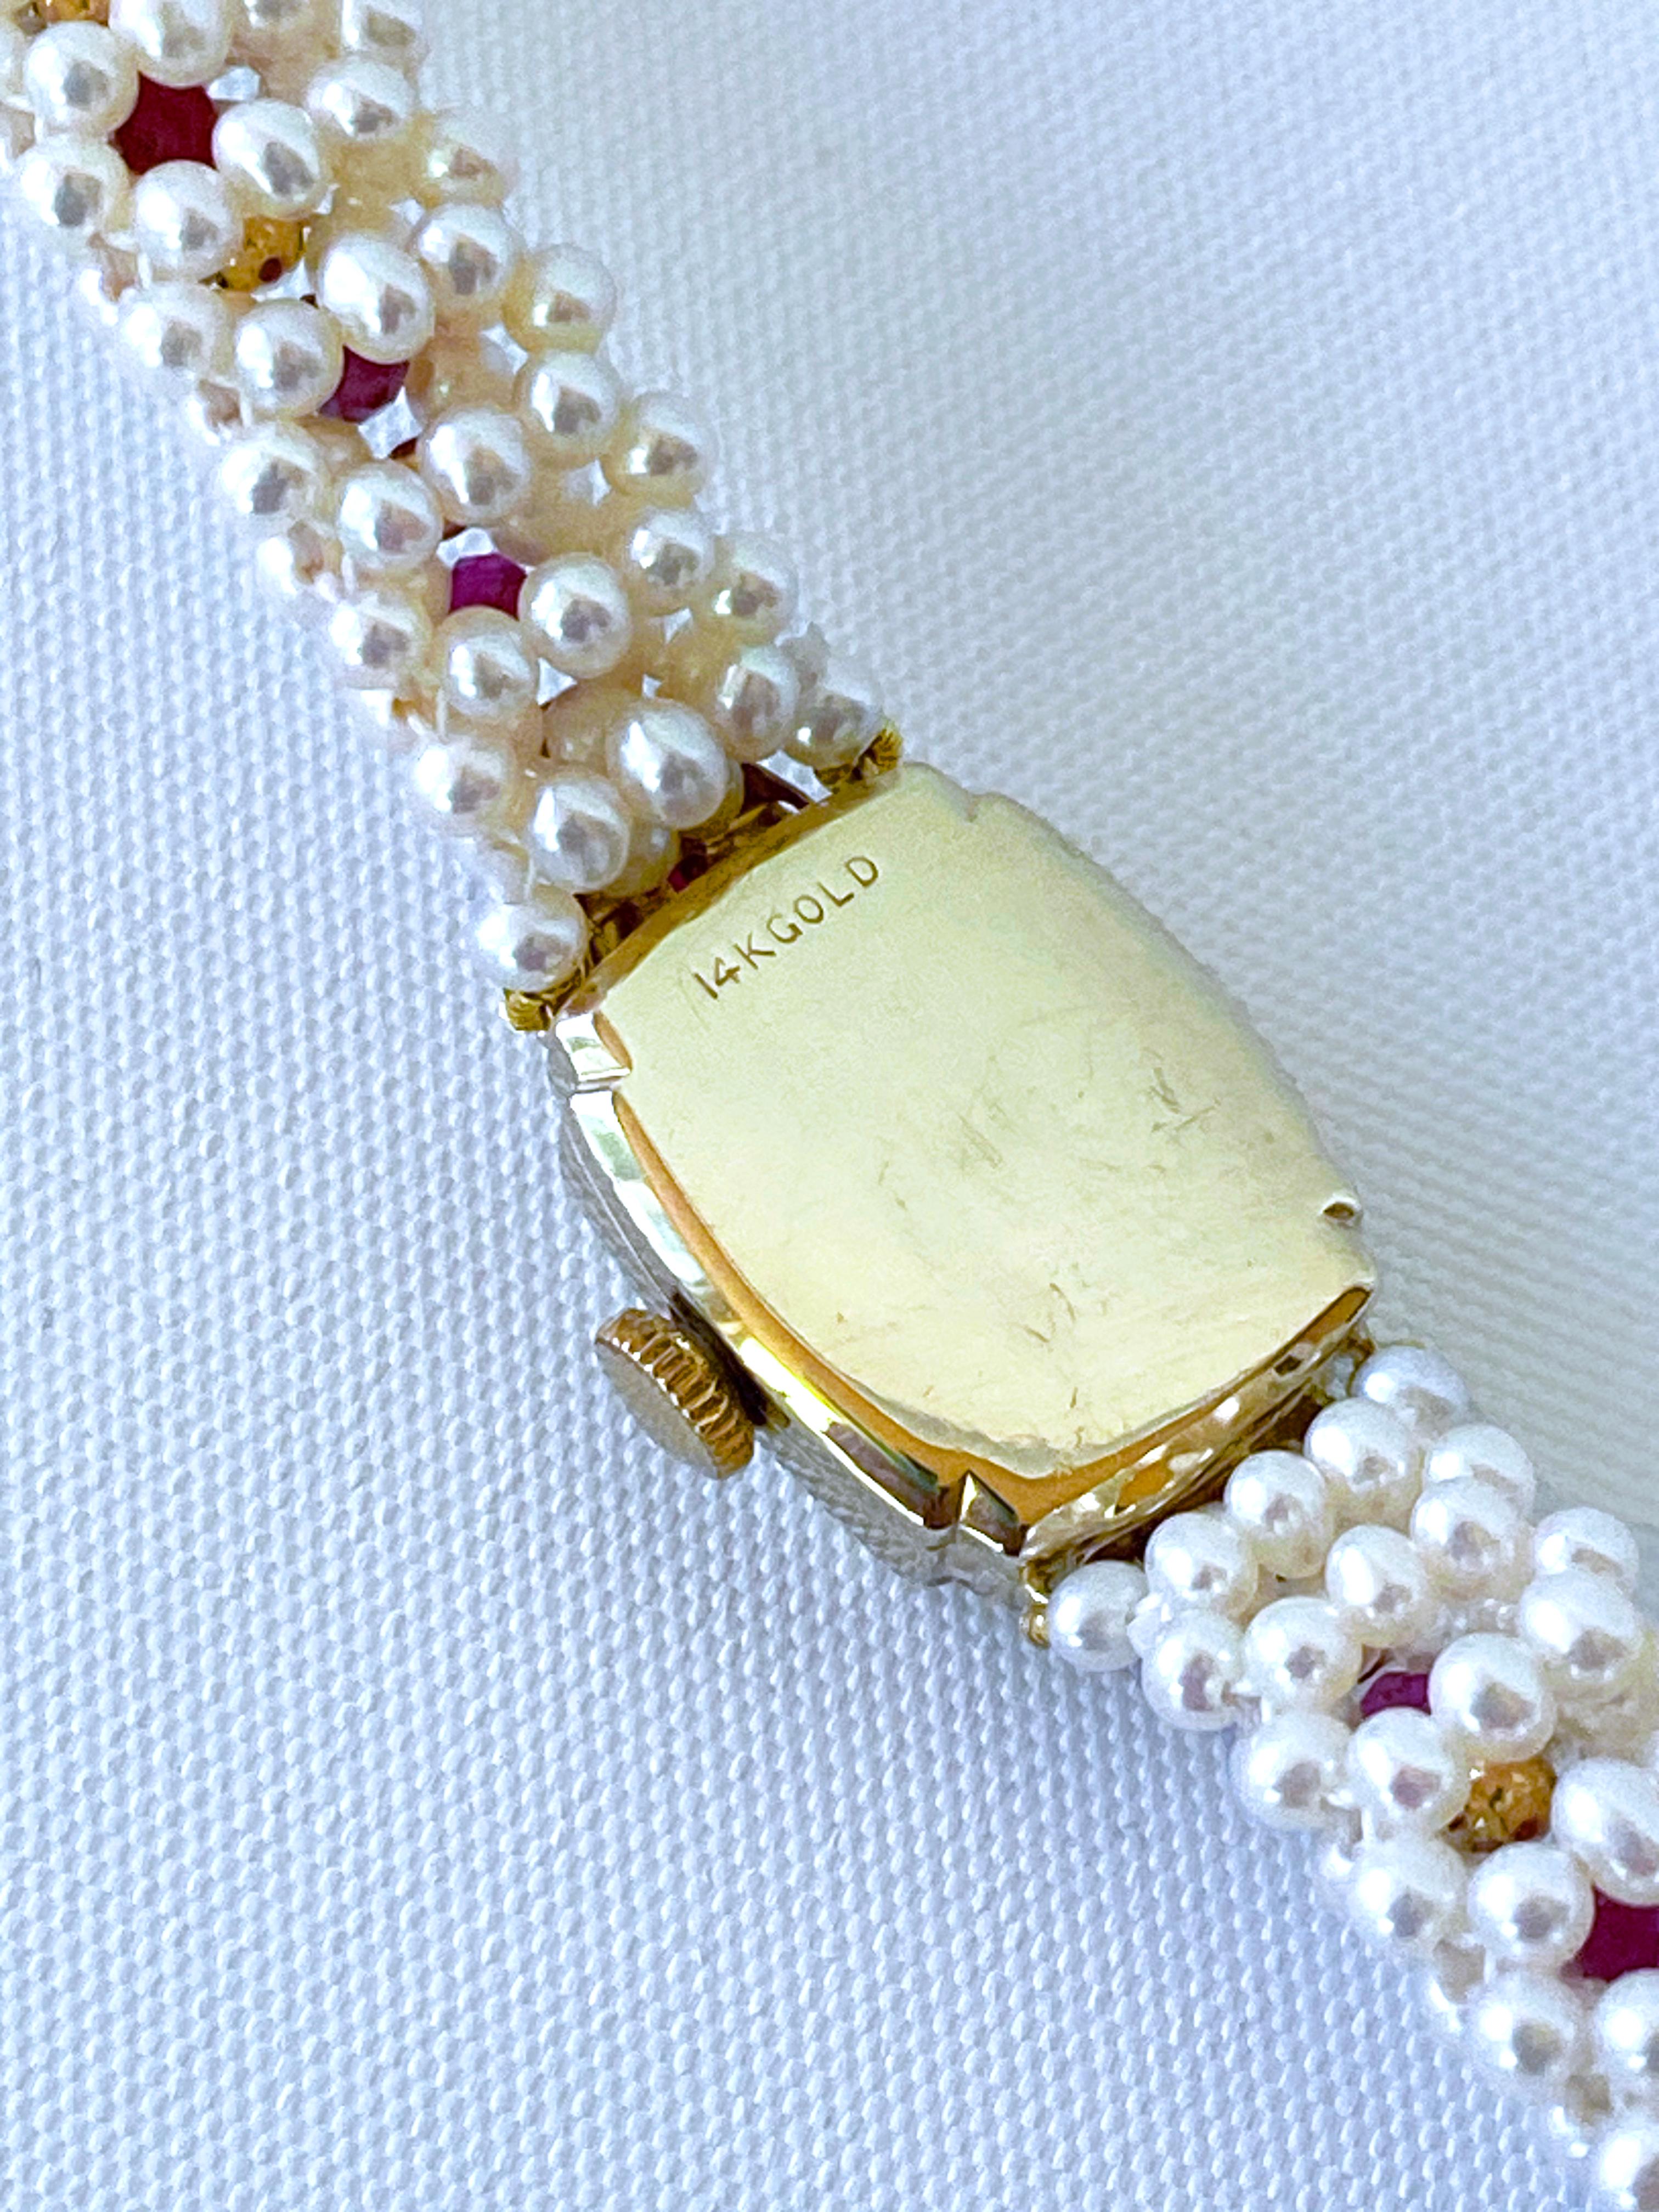 Beautiful One of A Kind stunning vintage working Winding Dial Watch is reworked into a timeless and elegant Pearl, Ruby and 14k Yellow Gold piece. Stamped and made in all solid 14k Yellow Gold, this timeless watch is revived by Tapered Baguette